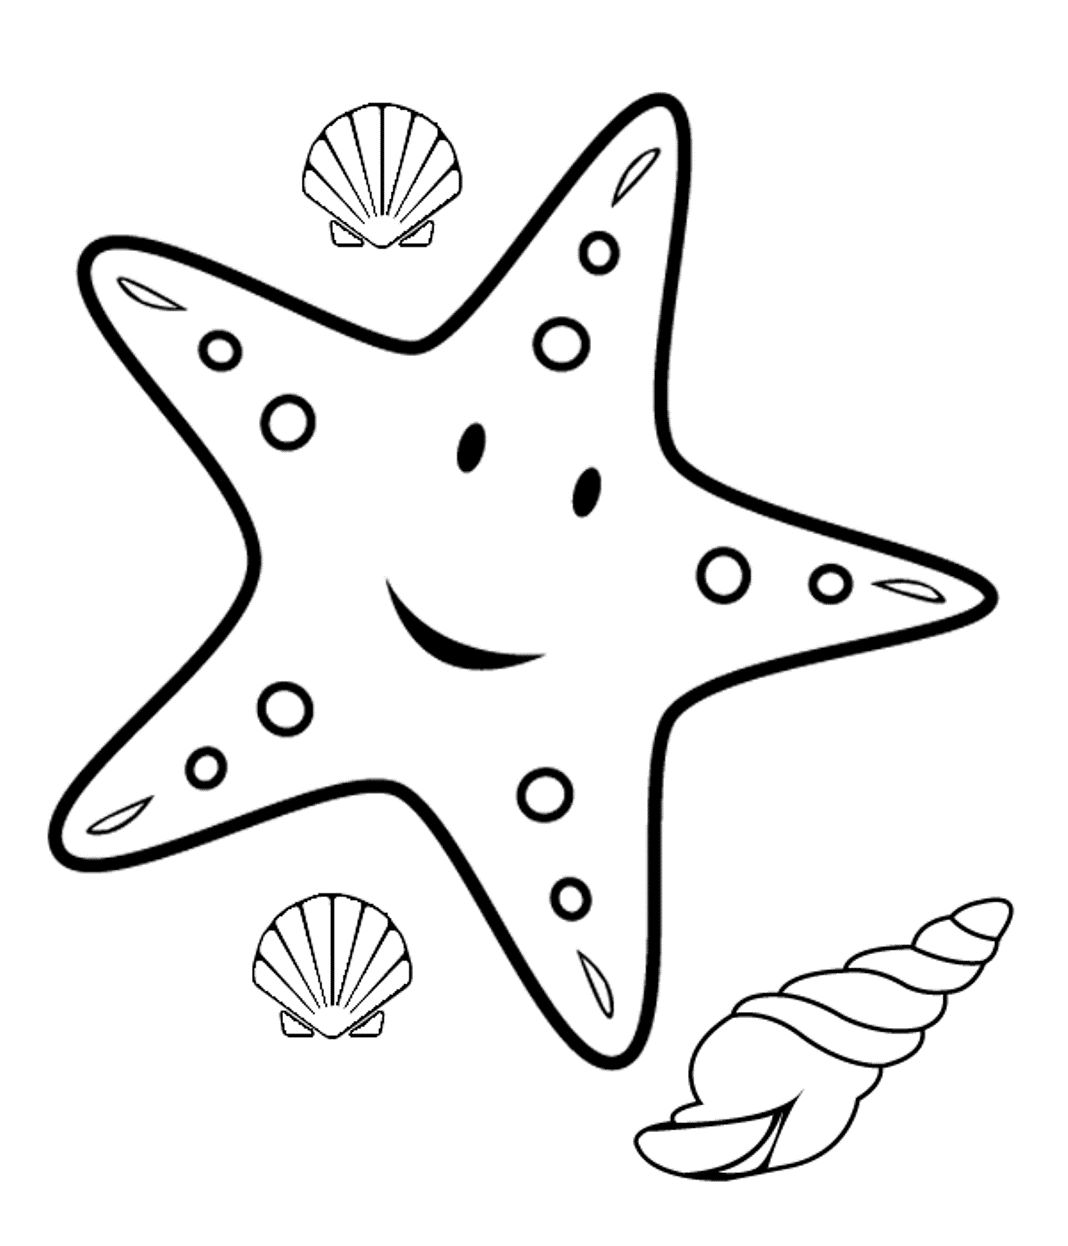 11-star-fish-coloring-pages-print-color-craft